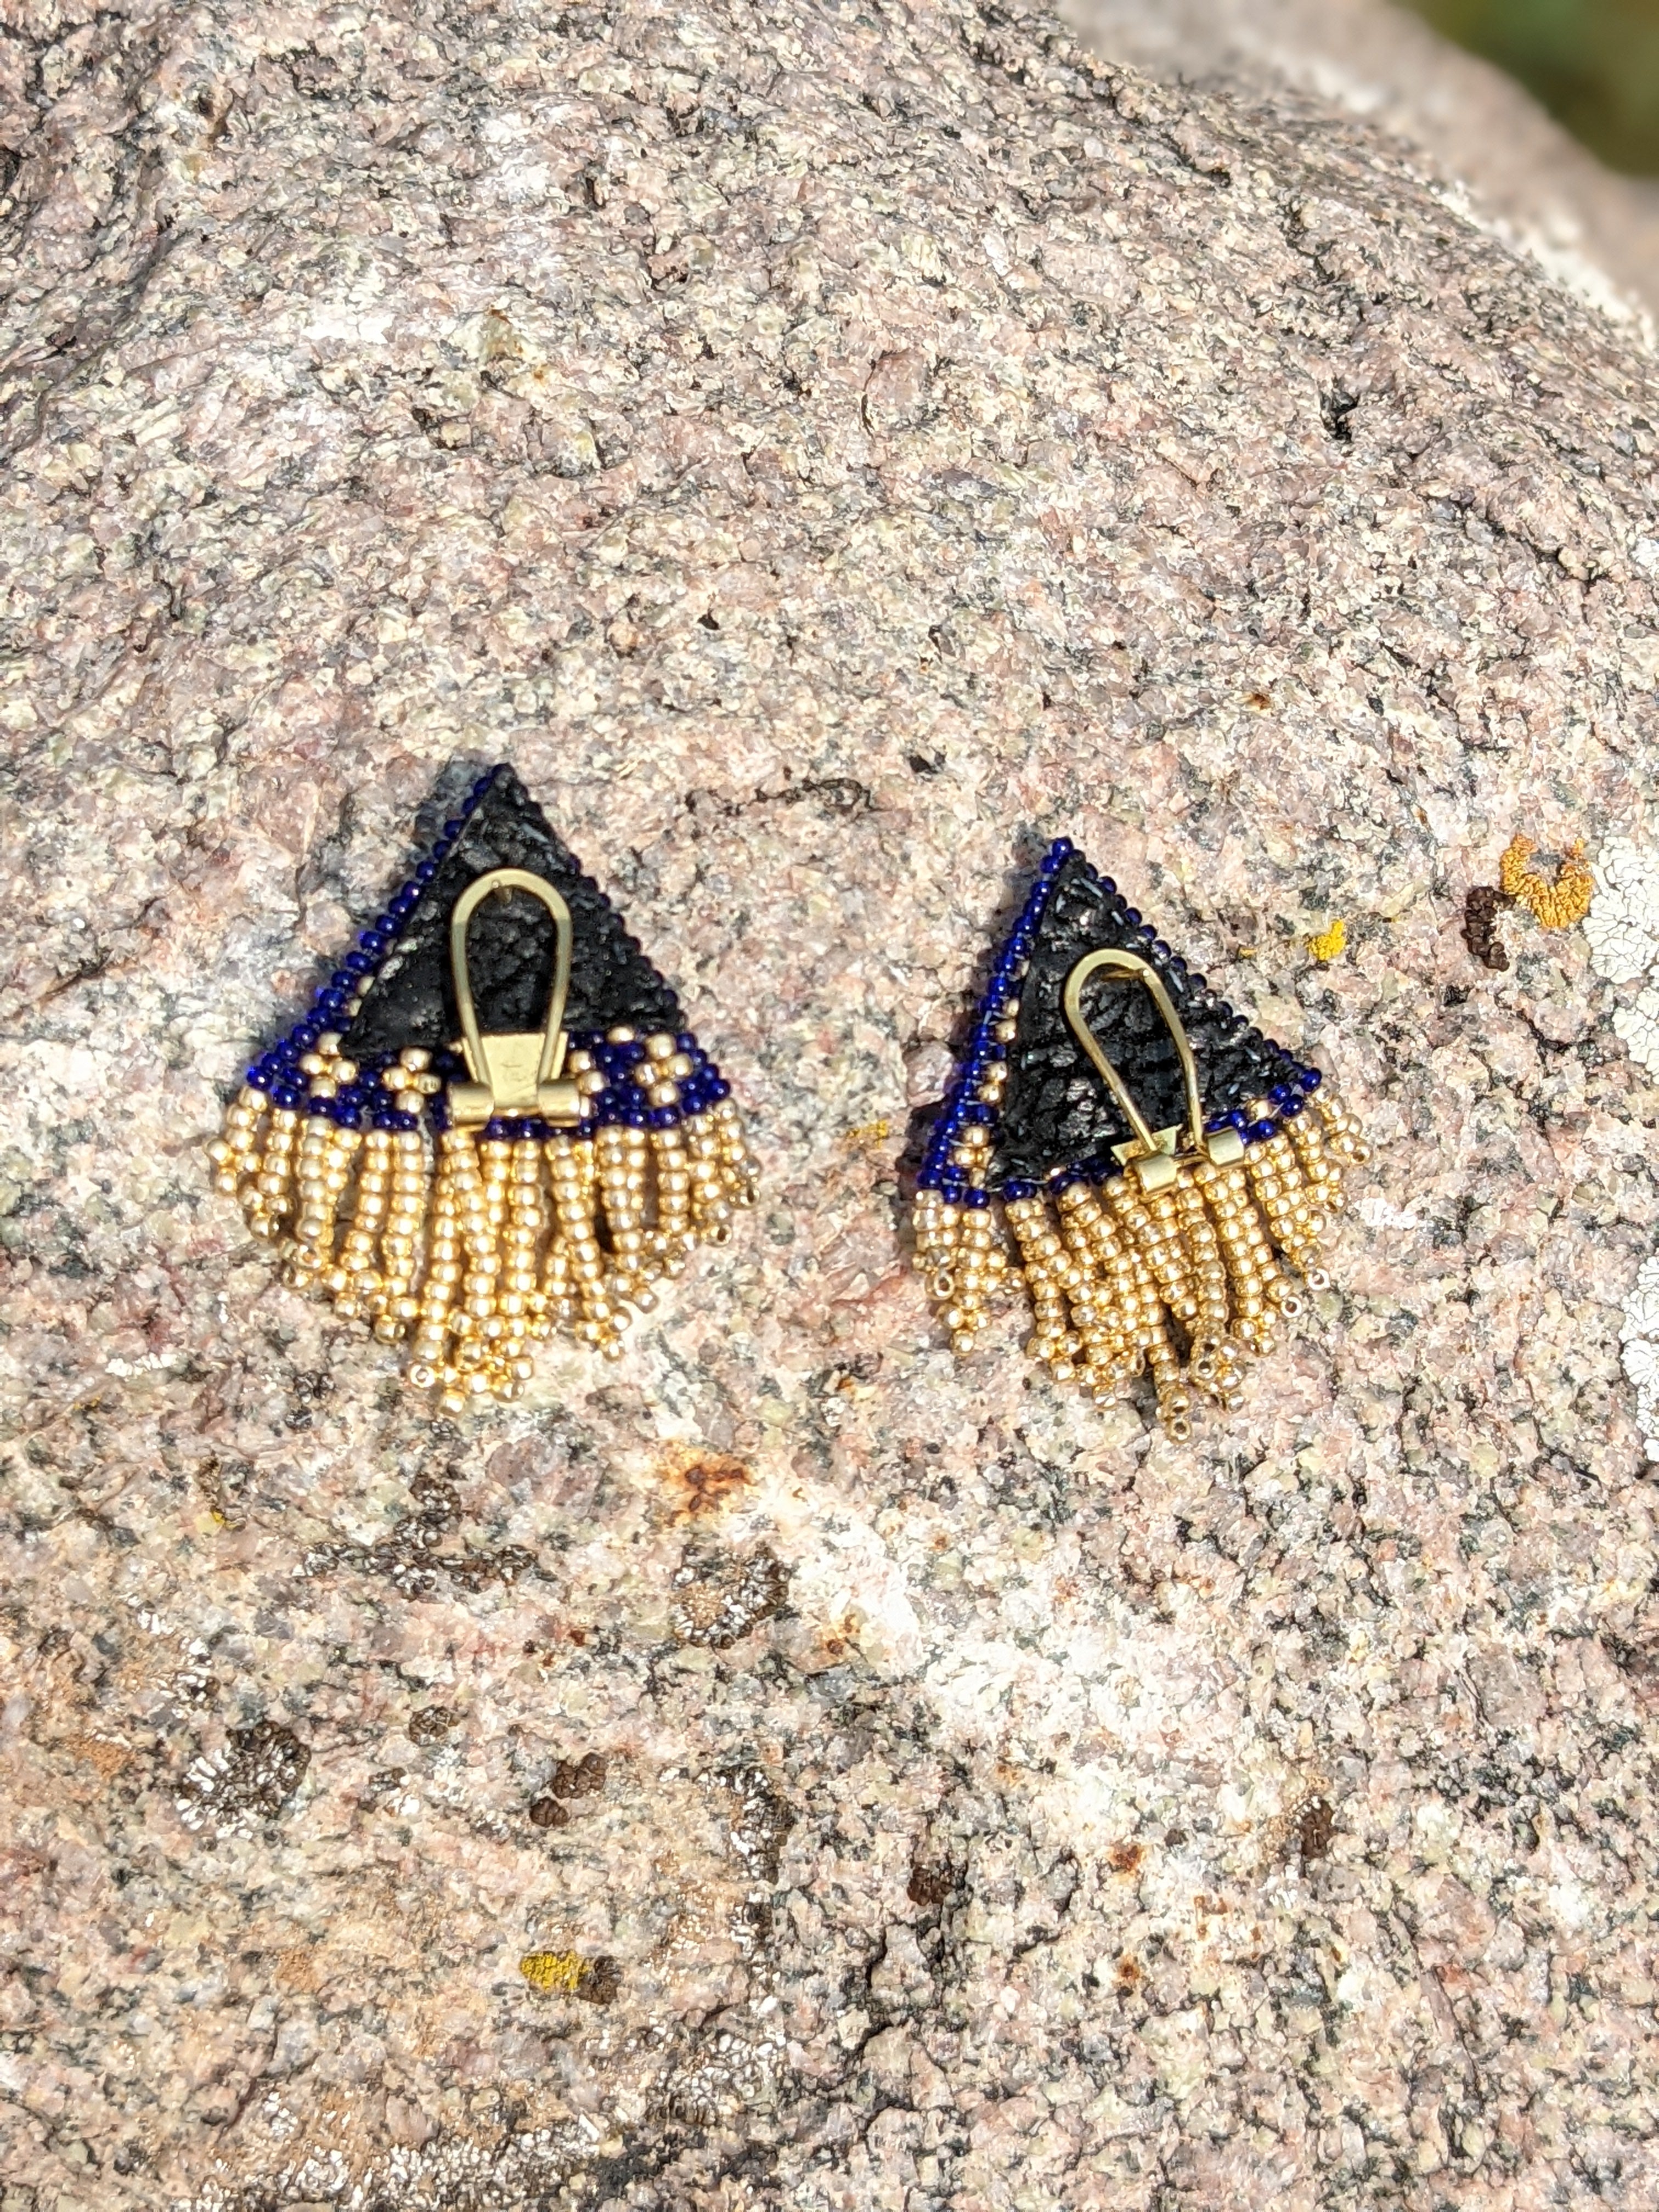 Hand Stitched Earrings